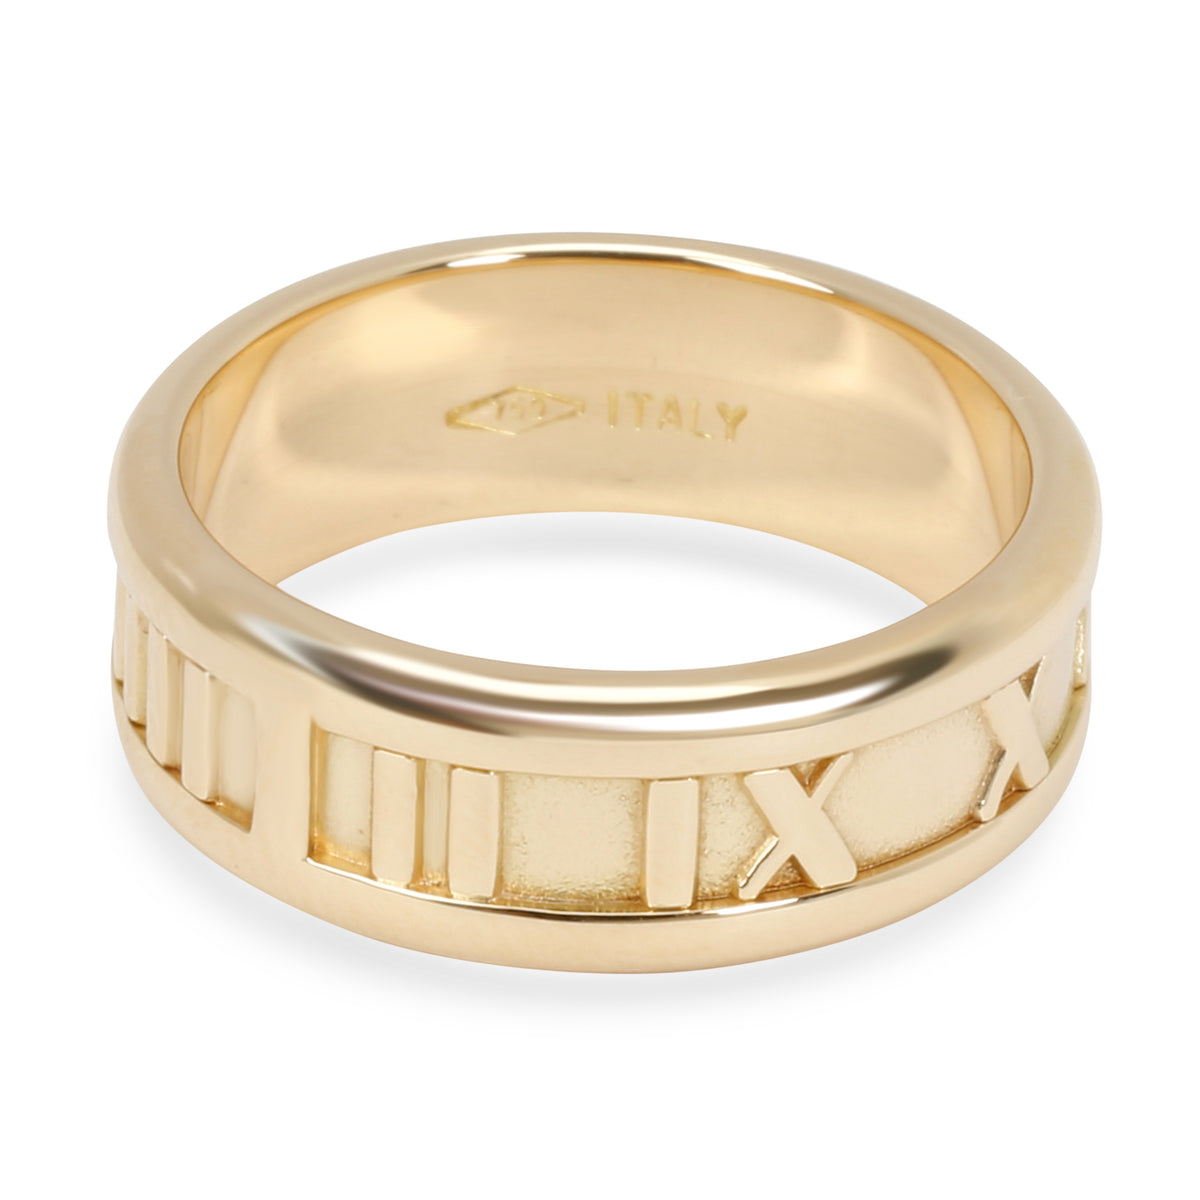 Tiffany & Co. Atlas Band in 18K Yellow Gold 7mm Wide